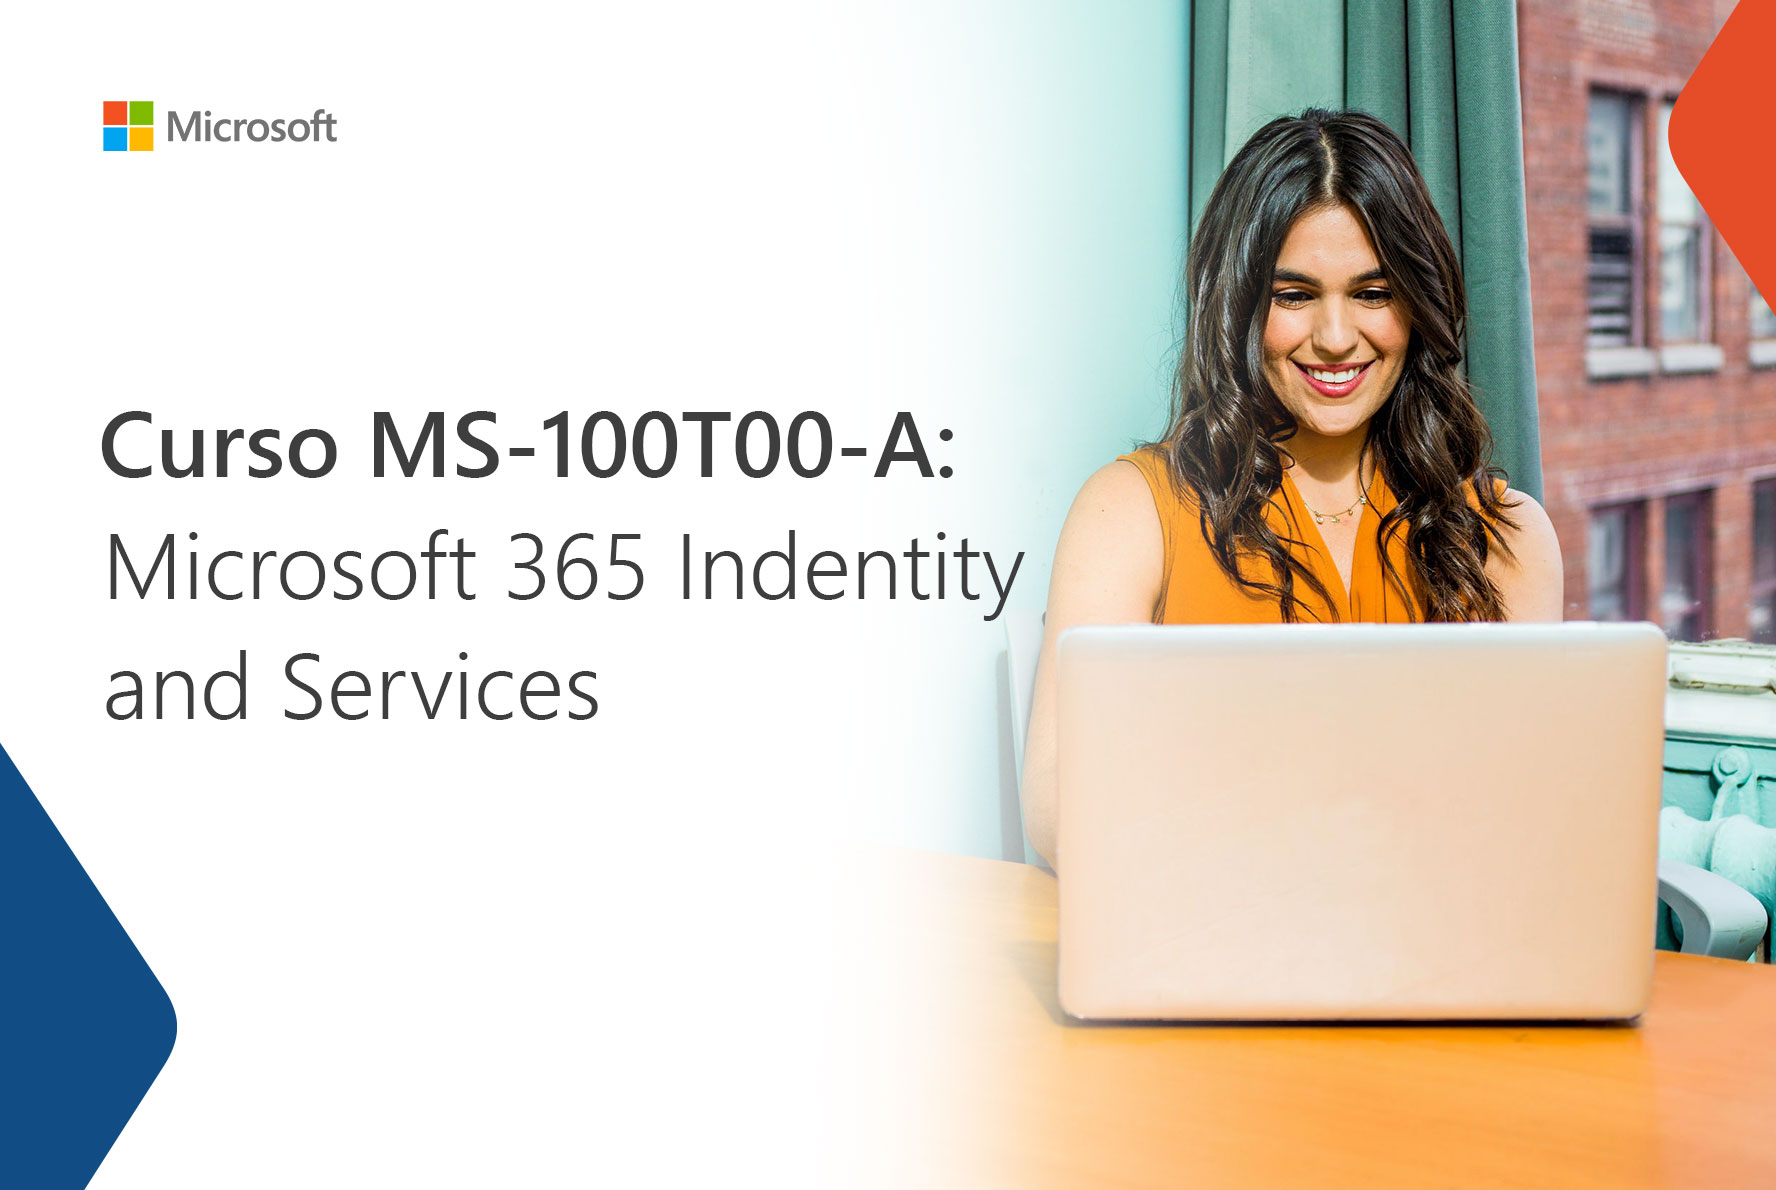 Microsoft 365 Identity and Services